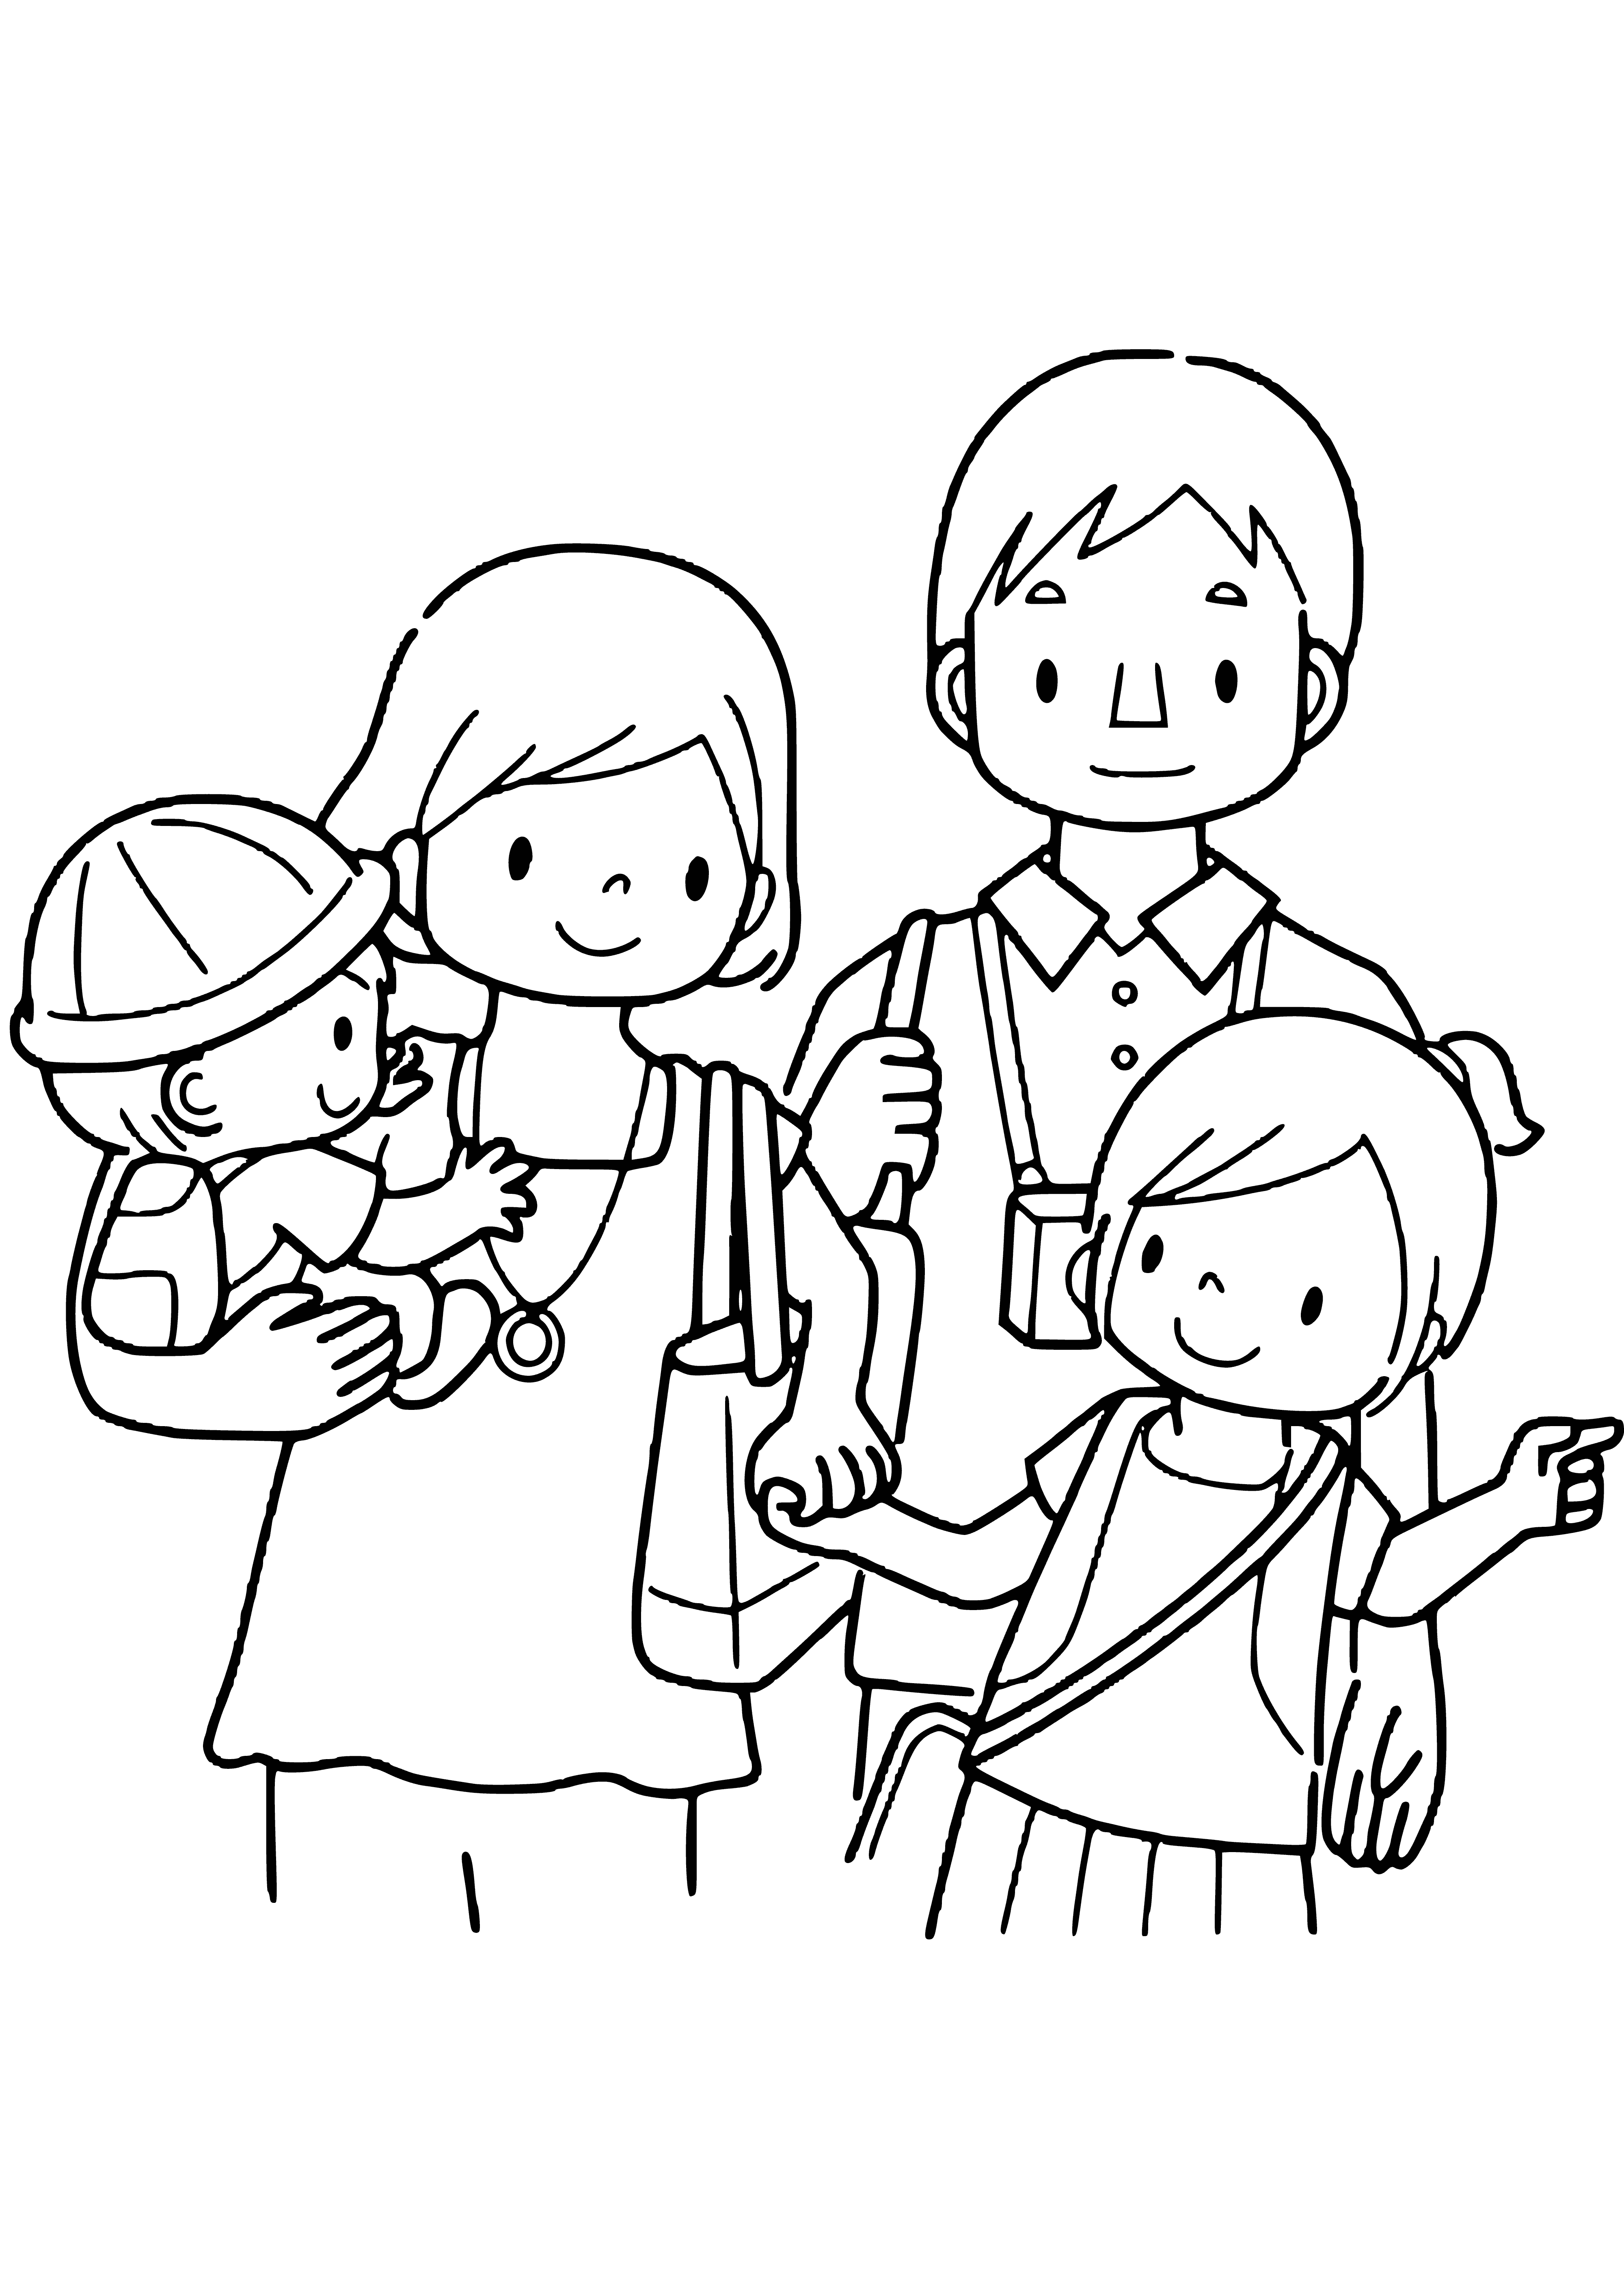 Friendly family coloring page